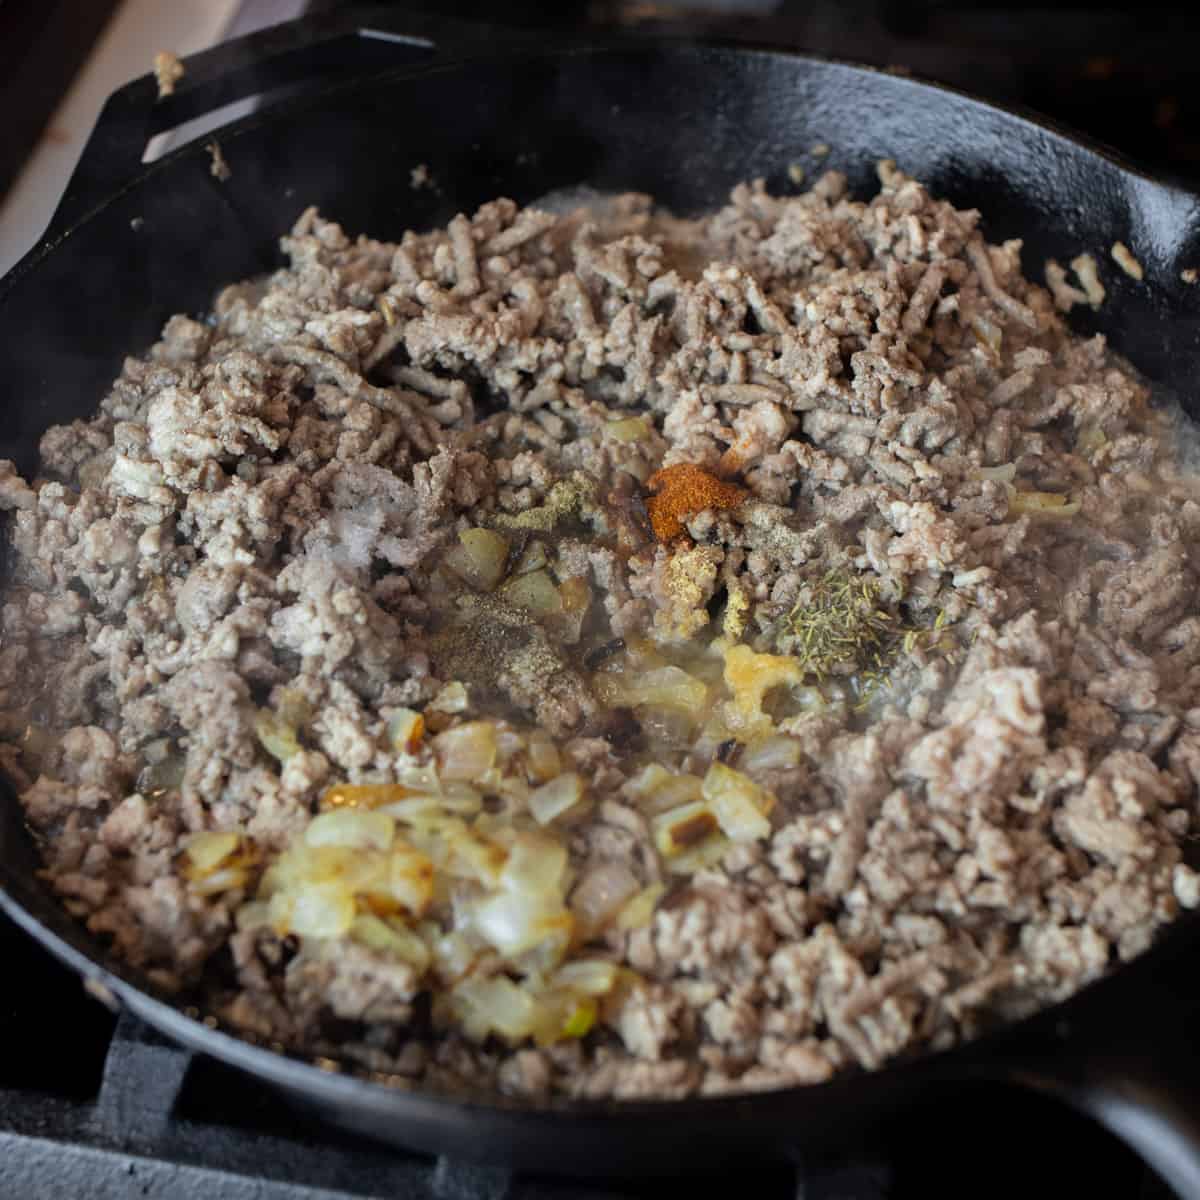 Cooked ground beef and pork in a skillet with onions and seasoning.